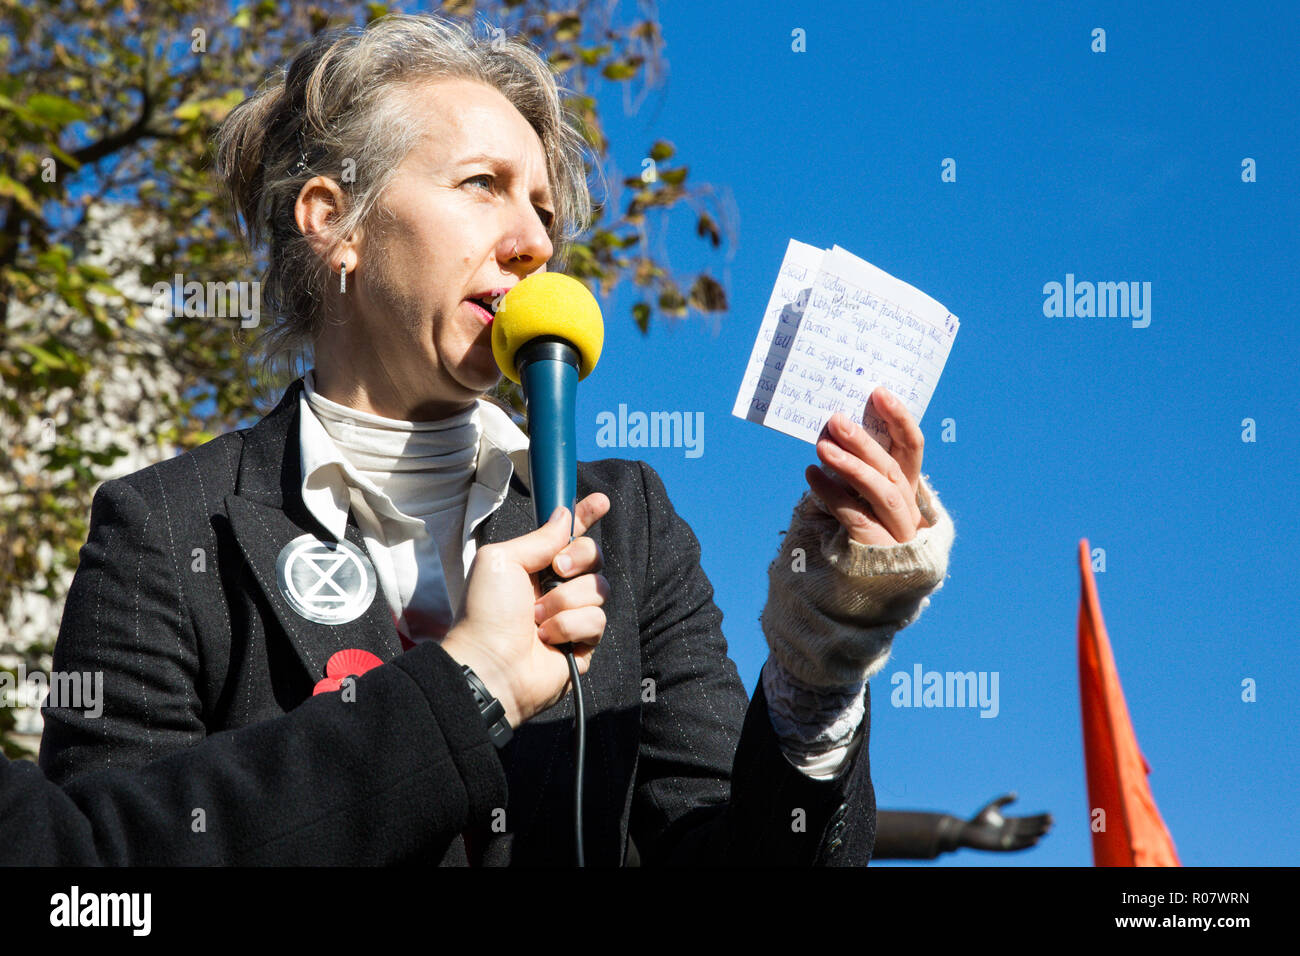 London, UK. 31st October, 2018. Dr Gail Bradbrook, scientist and activist, addresses environmental campaigners gathered in Parliament Square make a fo Stock Photo